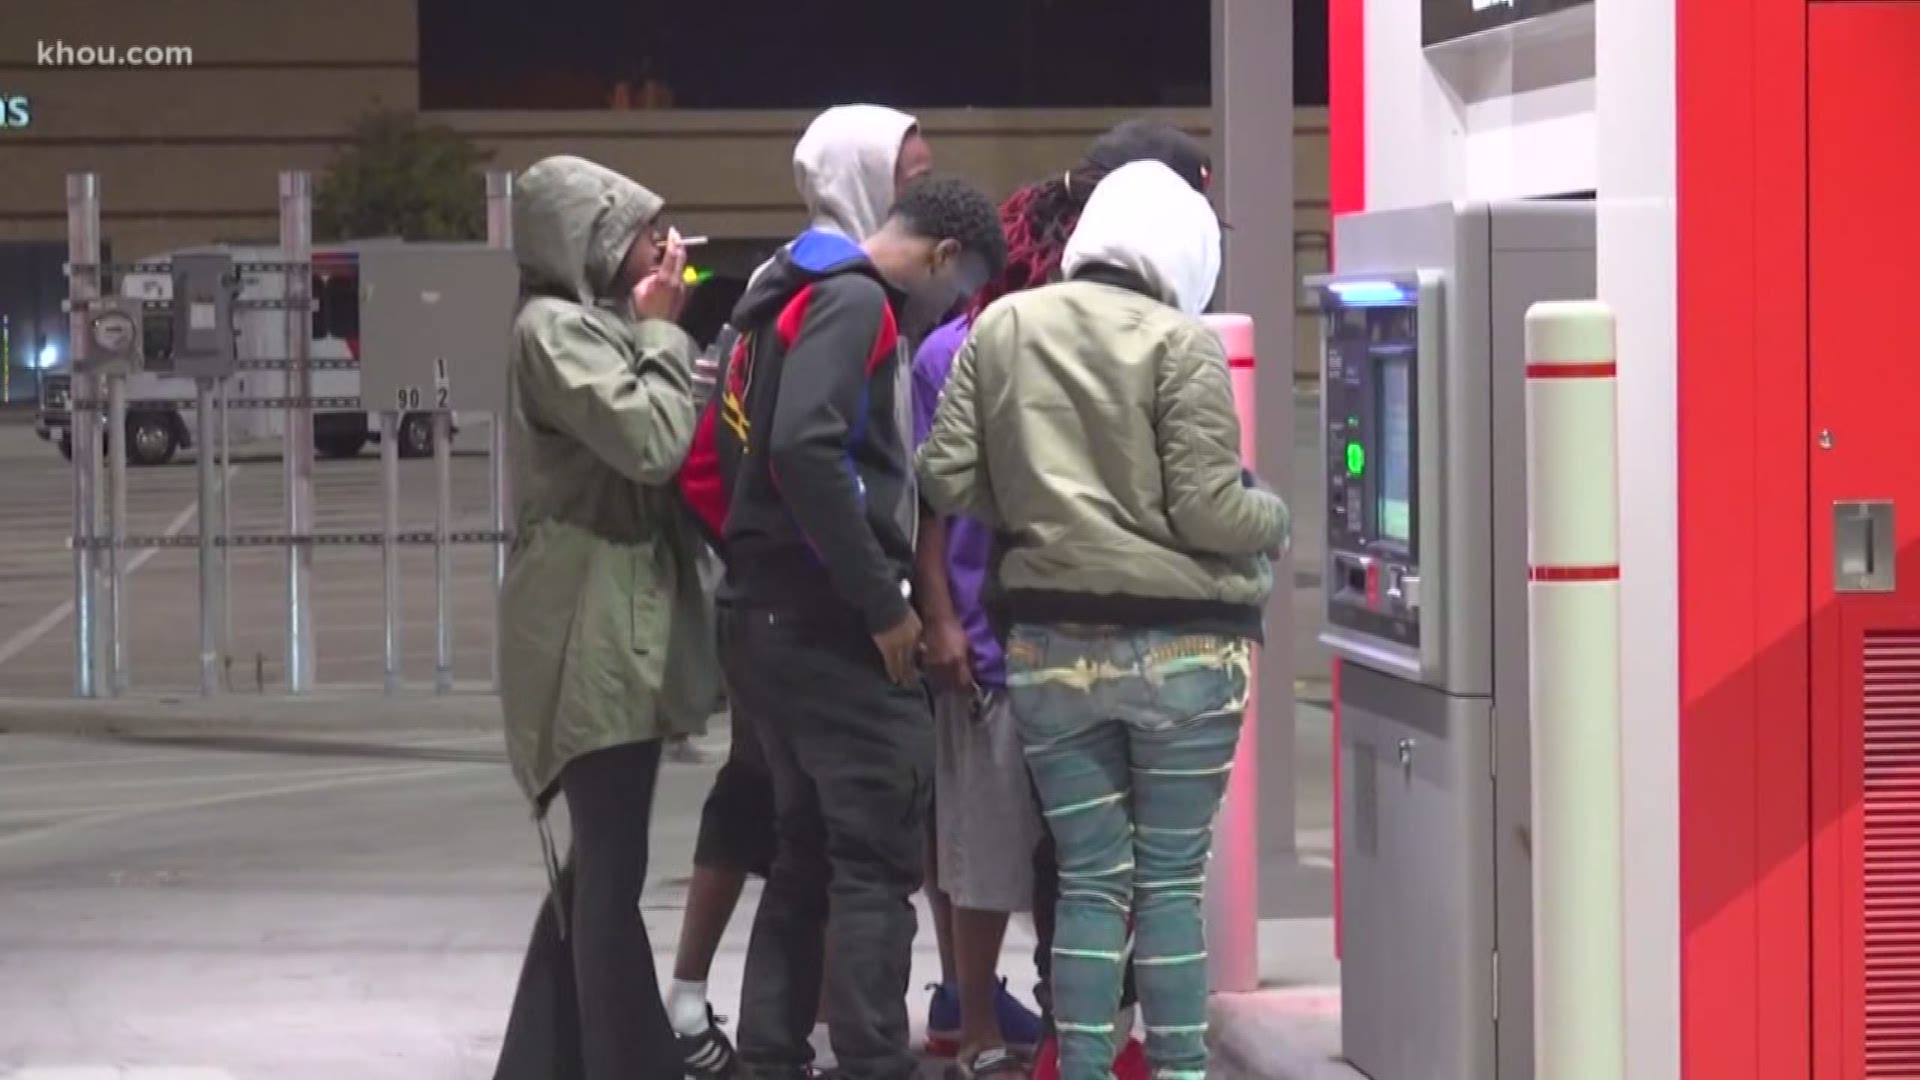 Deputies cleared a crowd surrounding a malfunctioning ATM after it started dispensing $100 bills overnight. And we got word this afternoon that people who got the extra cash get to keep it.